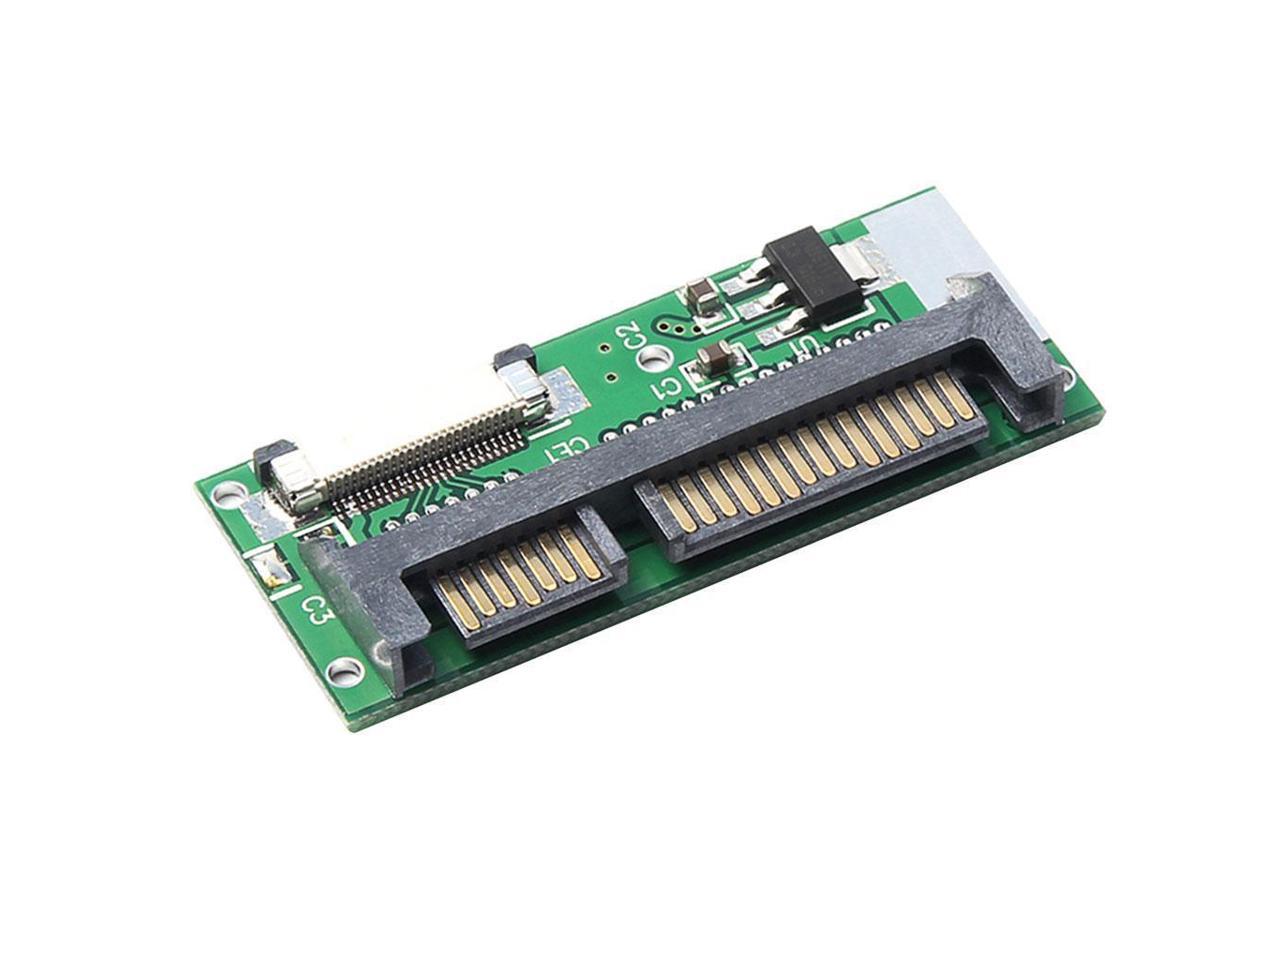 24Pin ZIF CE to 22Pin SATA Converter Adapter Card for Desktop/Laptop PC 2 Pieces 1.8 inch LIF to 2.5 inch SATA